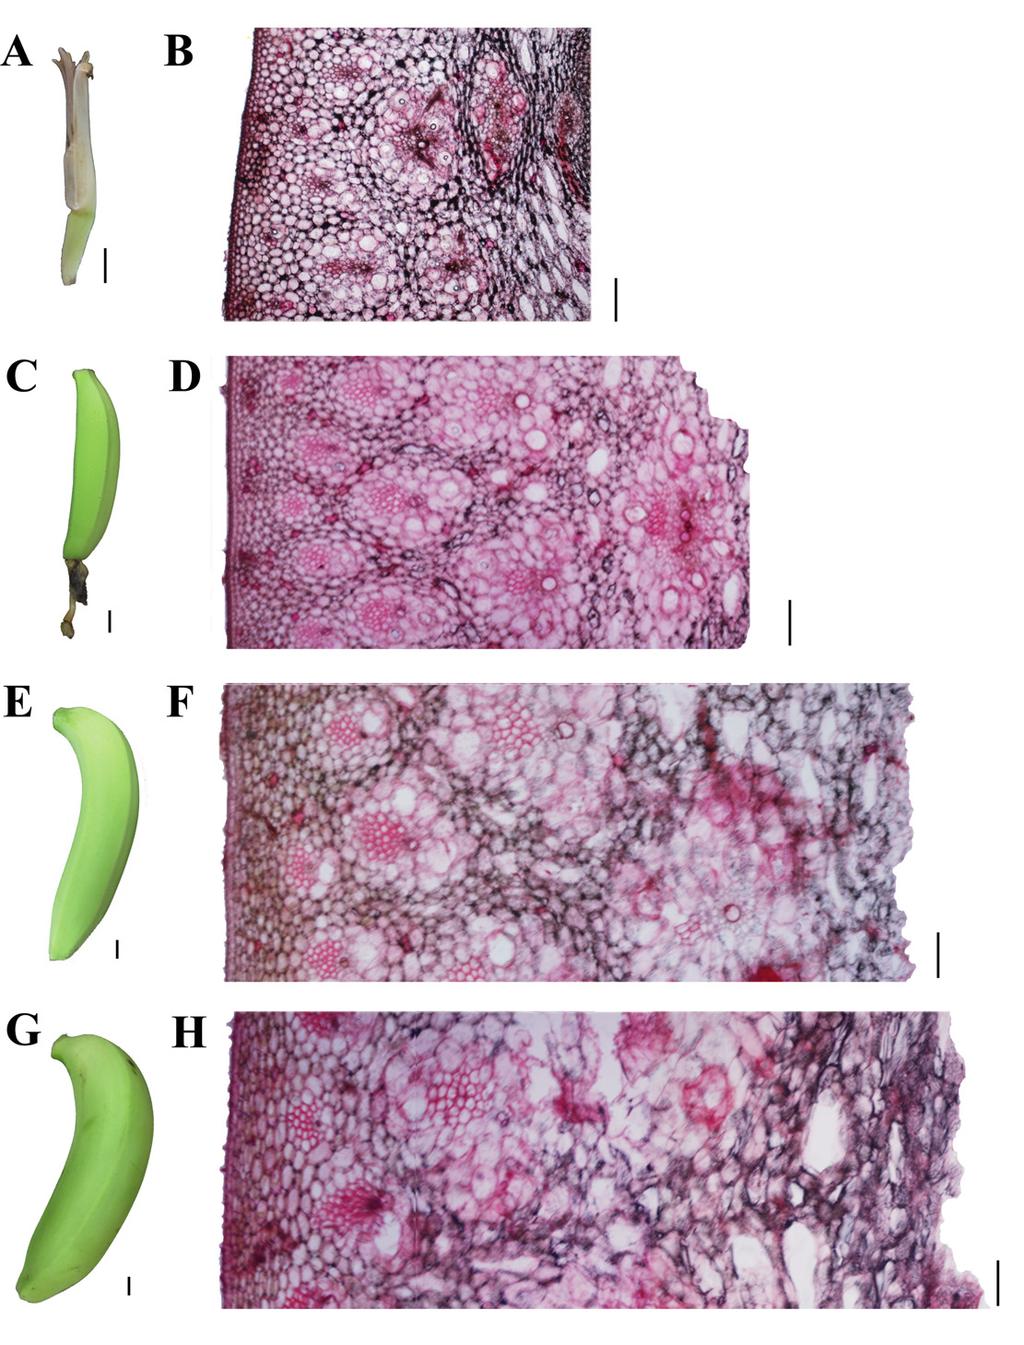 AMNUAYSIN ET AL. ANATOMICAL CHANGES IN PEEL STRUCTURE OF BANANA 131 Anatomical Peel Structure and Firmness of Hom Thong Banana During Maturation and Ripening.